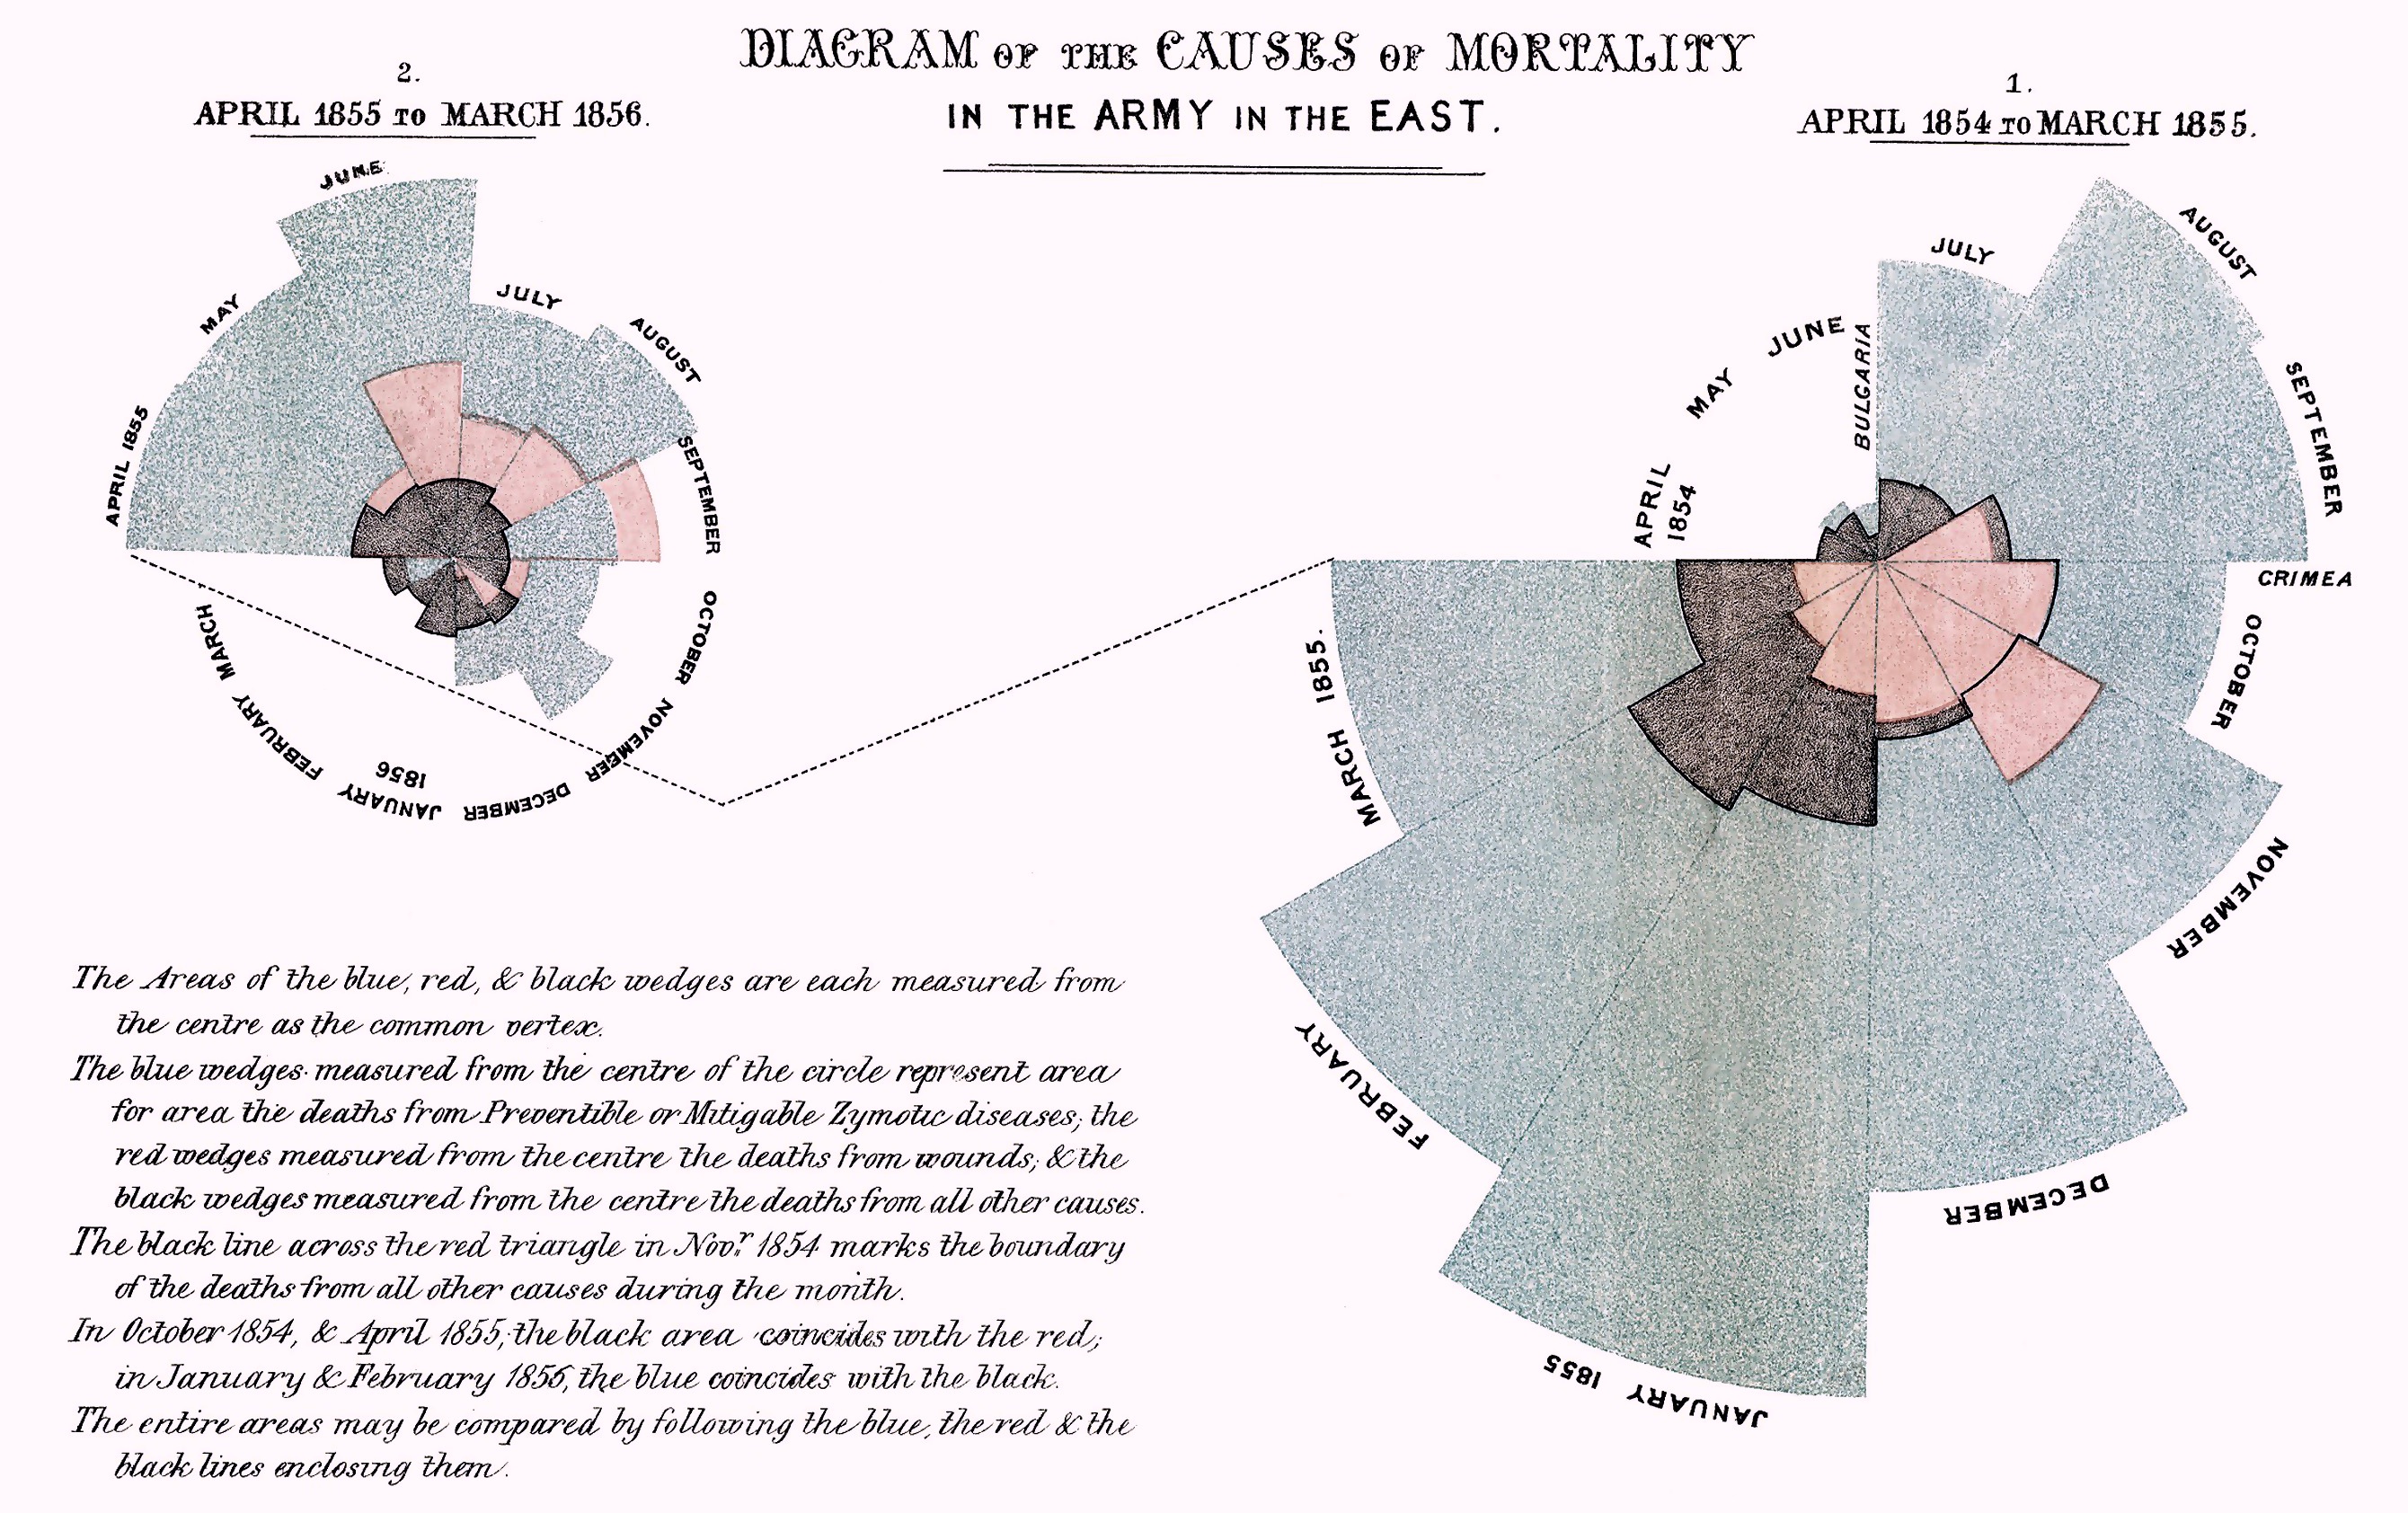 Florence Nightingale's 1858 diagram of the causes of mortality in the army (source: Wikipedia). She's credited with developing the polar area diagram chart.